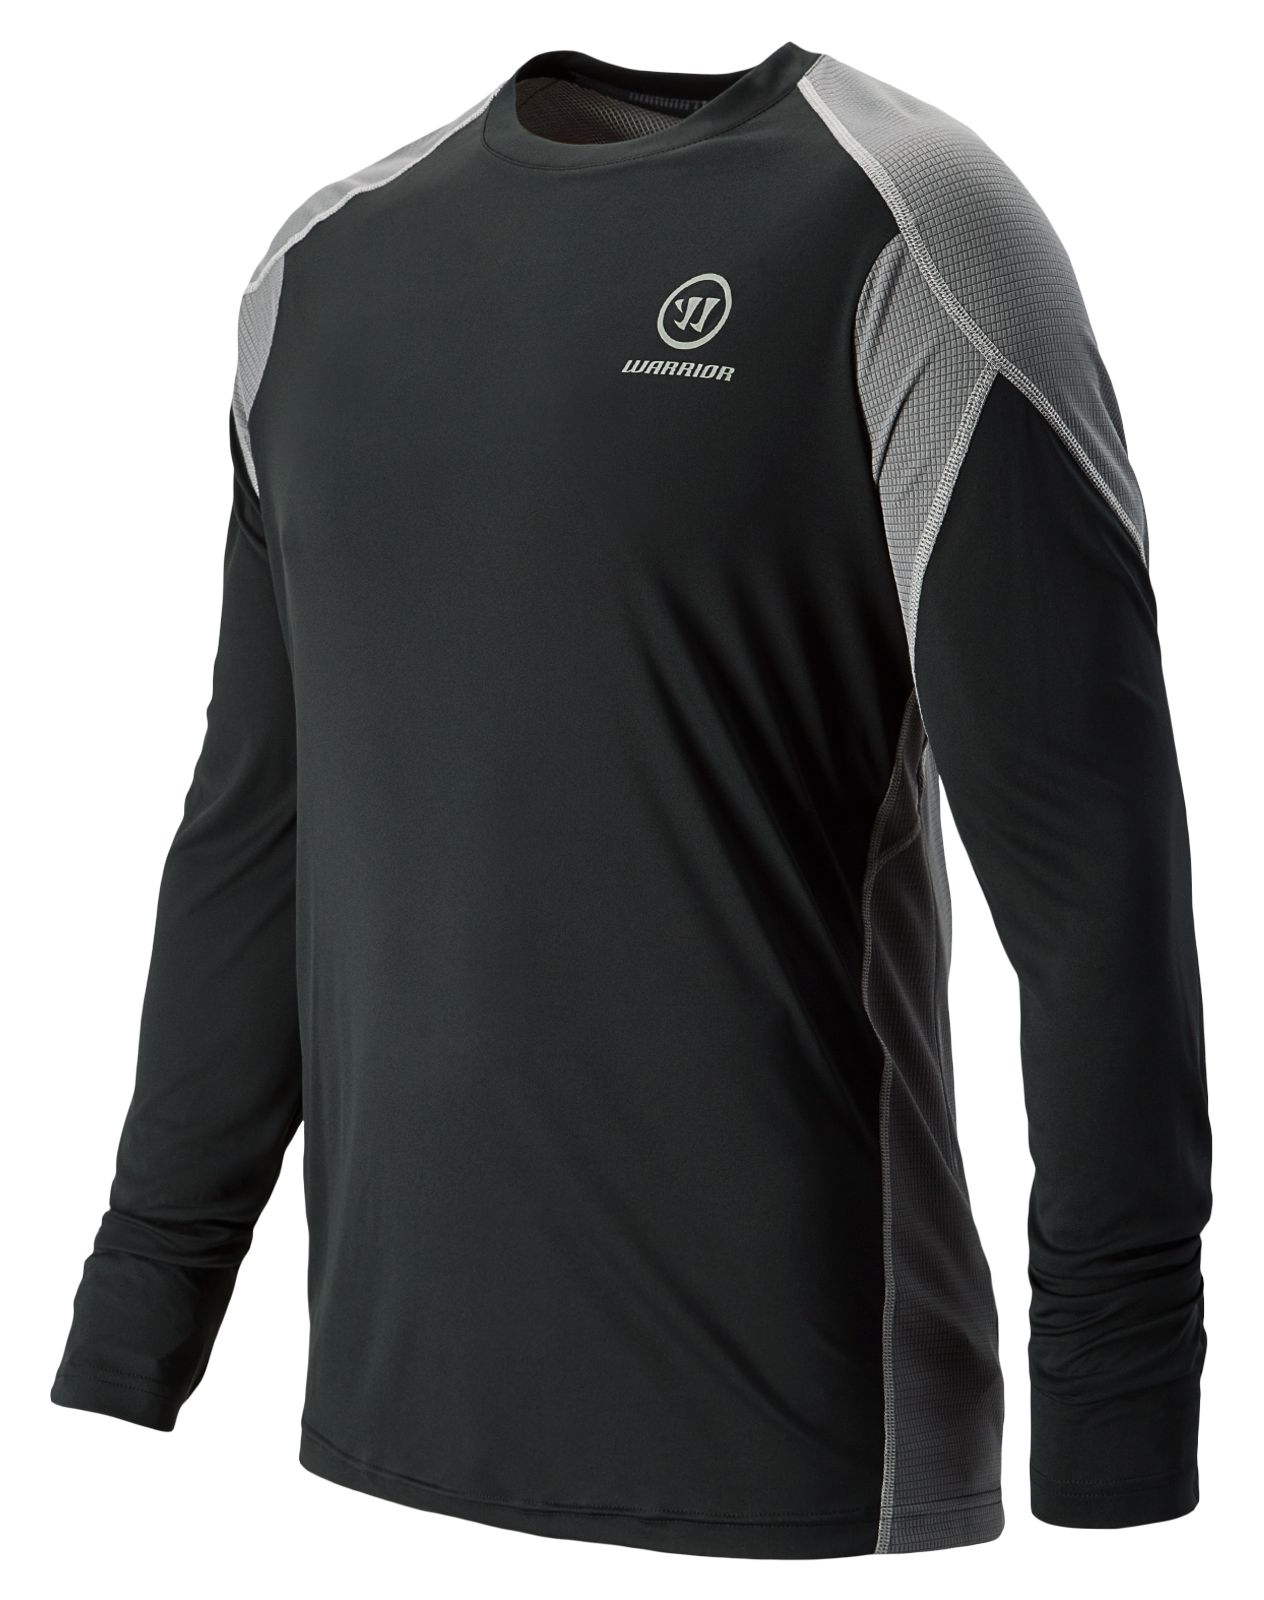 Covert Long Sleeve Top, Black with Grey image number 1